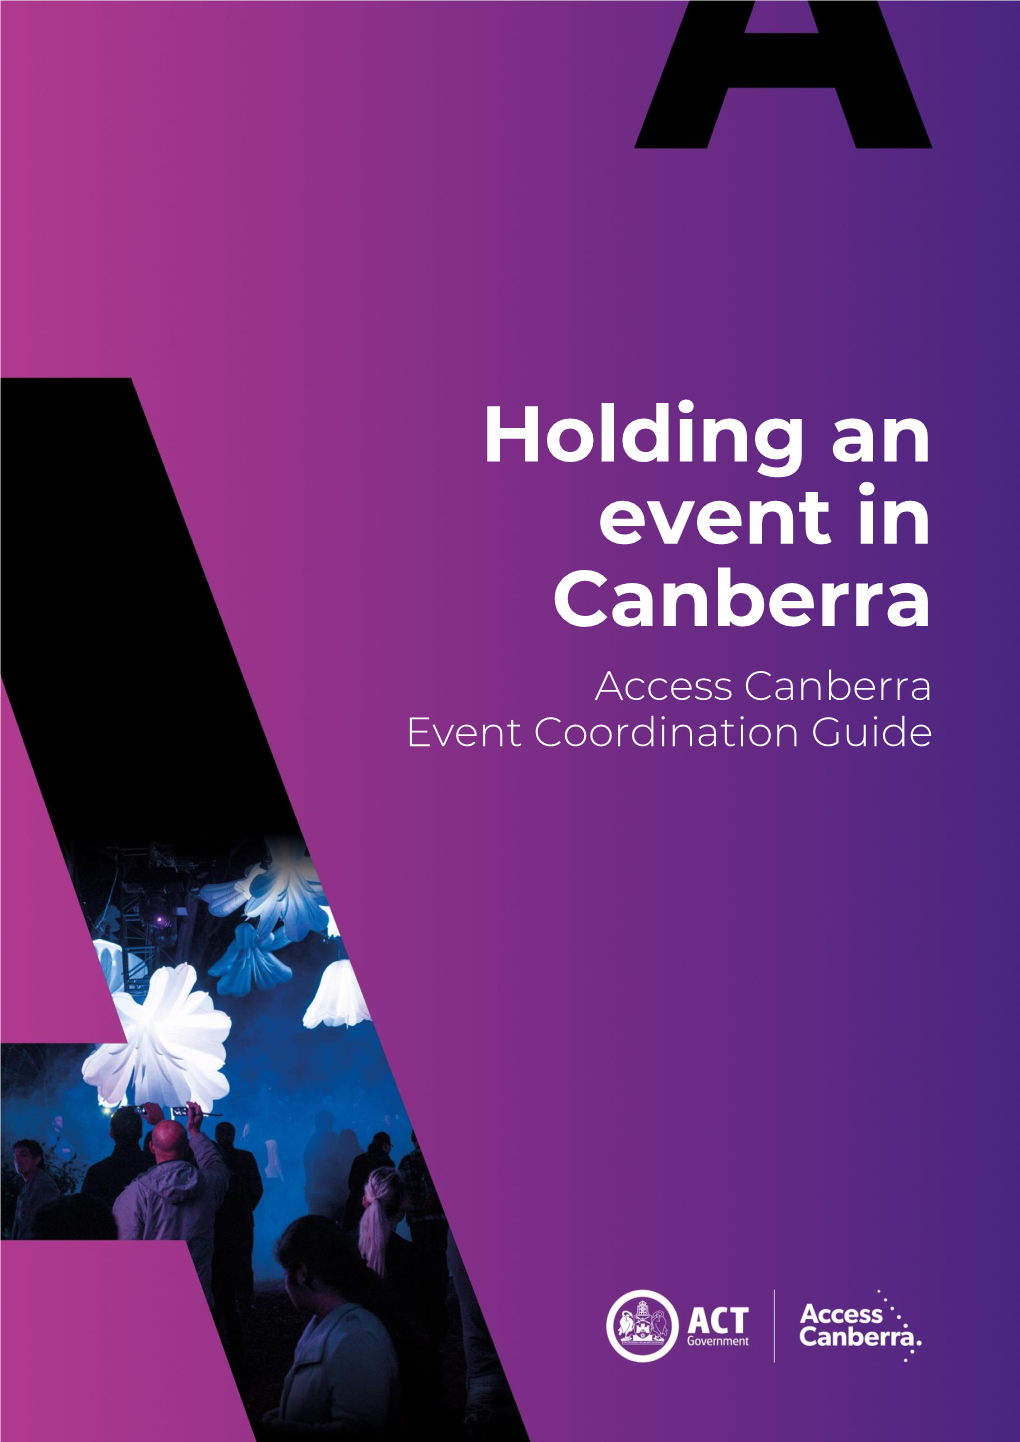 Access Canberra 'Event Coordination Guide'